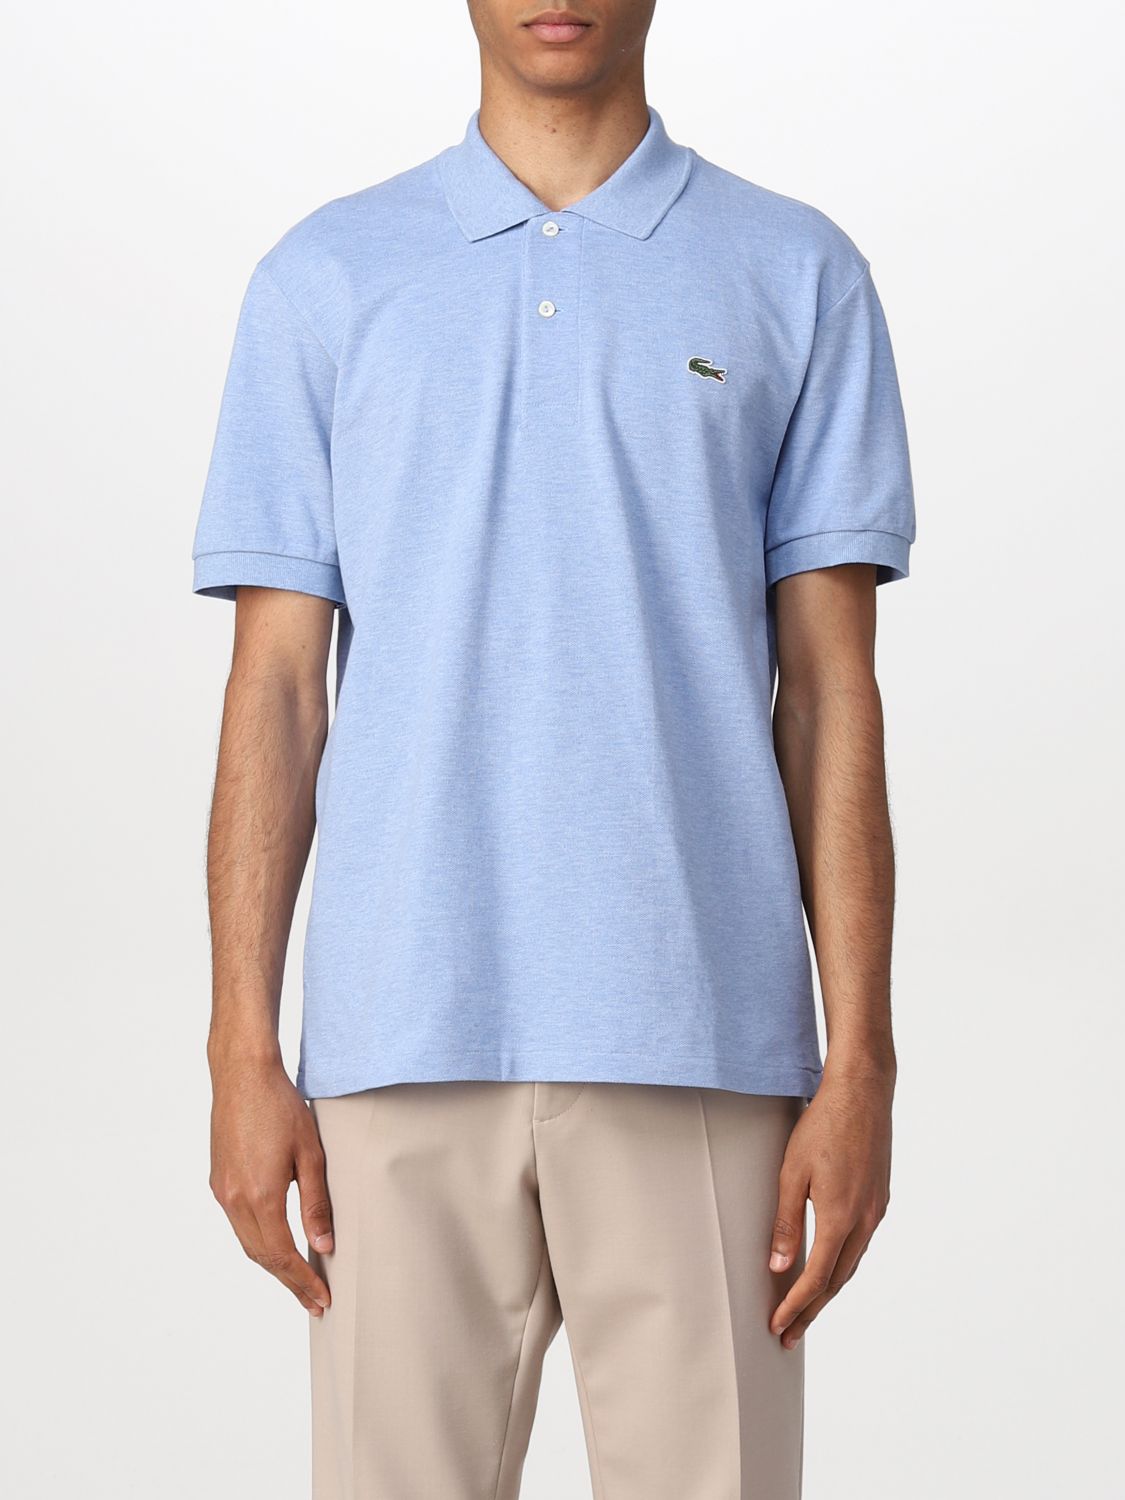 LACOSTE: polo shirt for - Sky Blue | Lacoste polo shirt L1264 on GIGLIO.COM